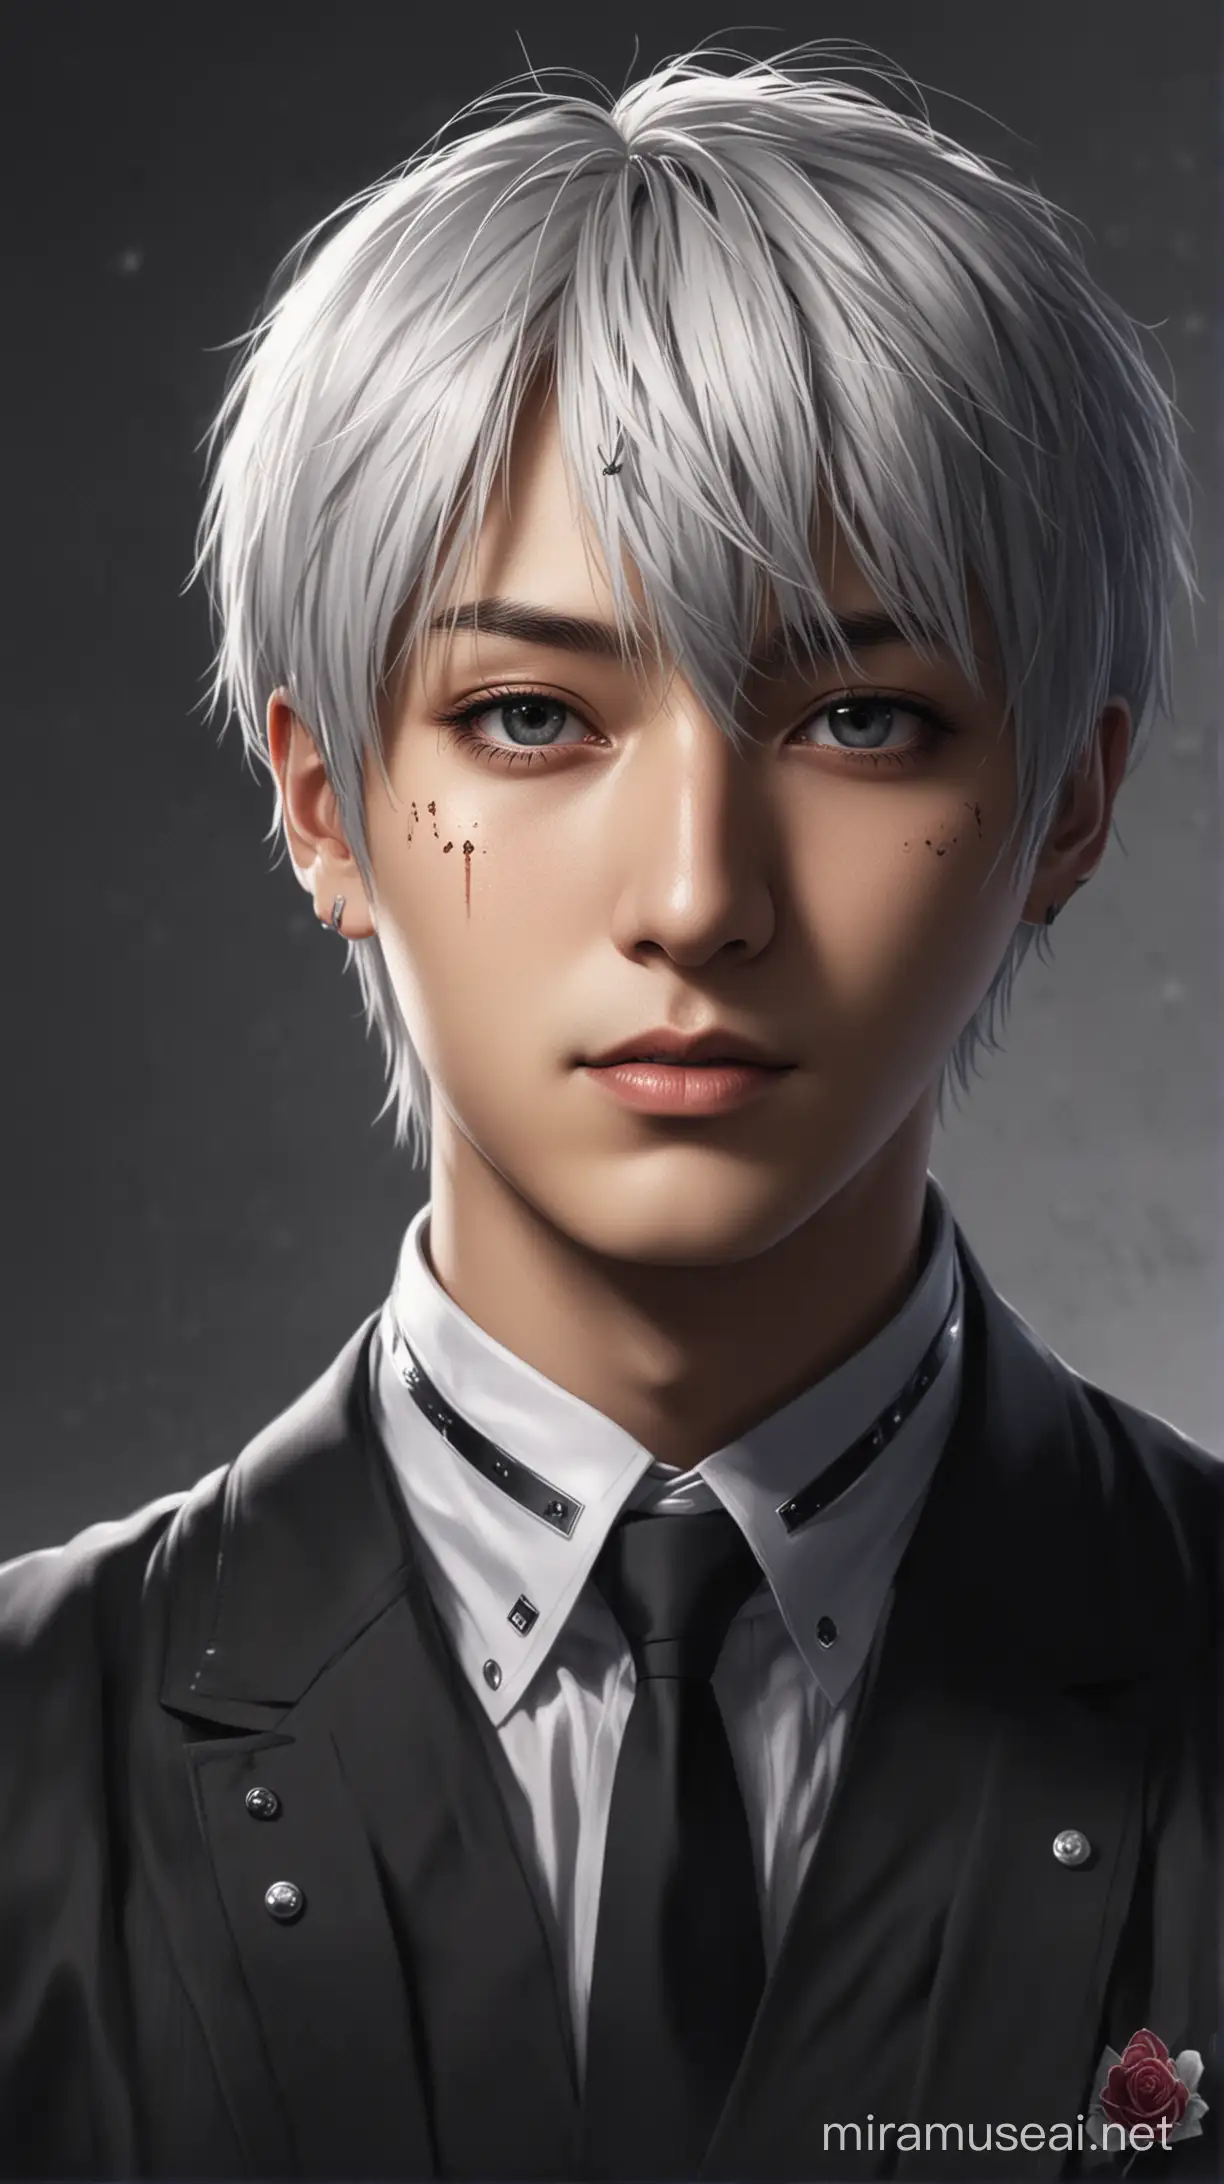 Hybrid Portrait of Jungkook from BTS and Ken Kaneki from Tokyo Ghoul Anime